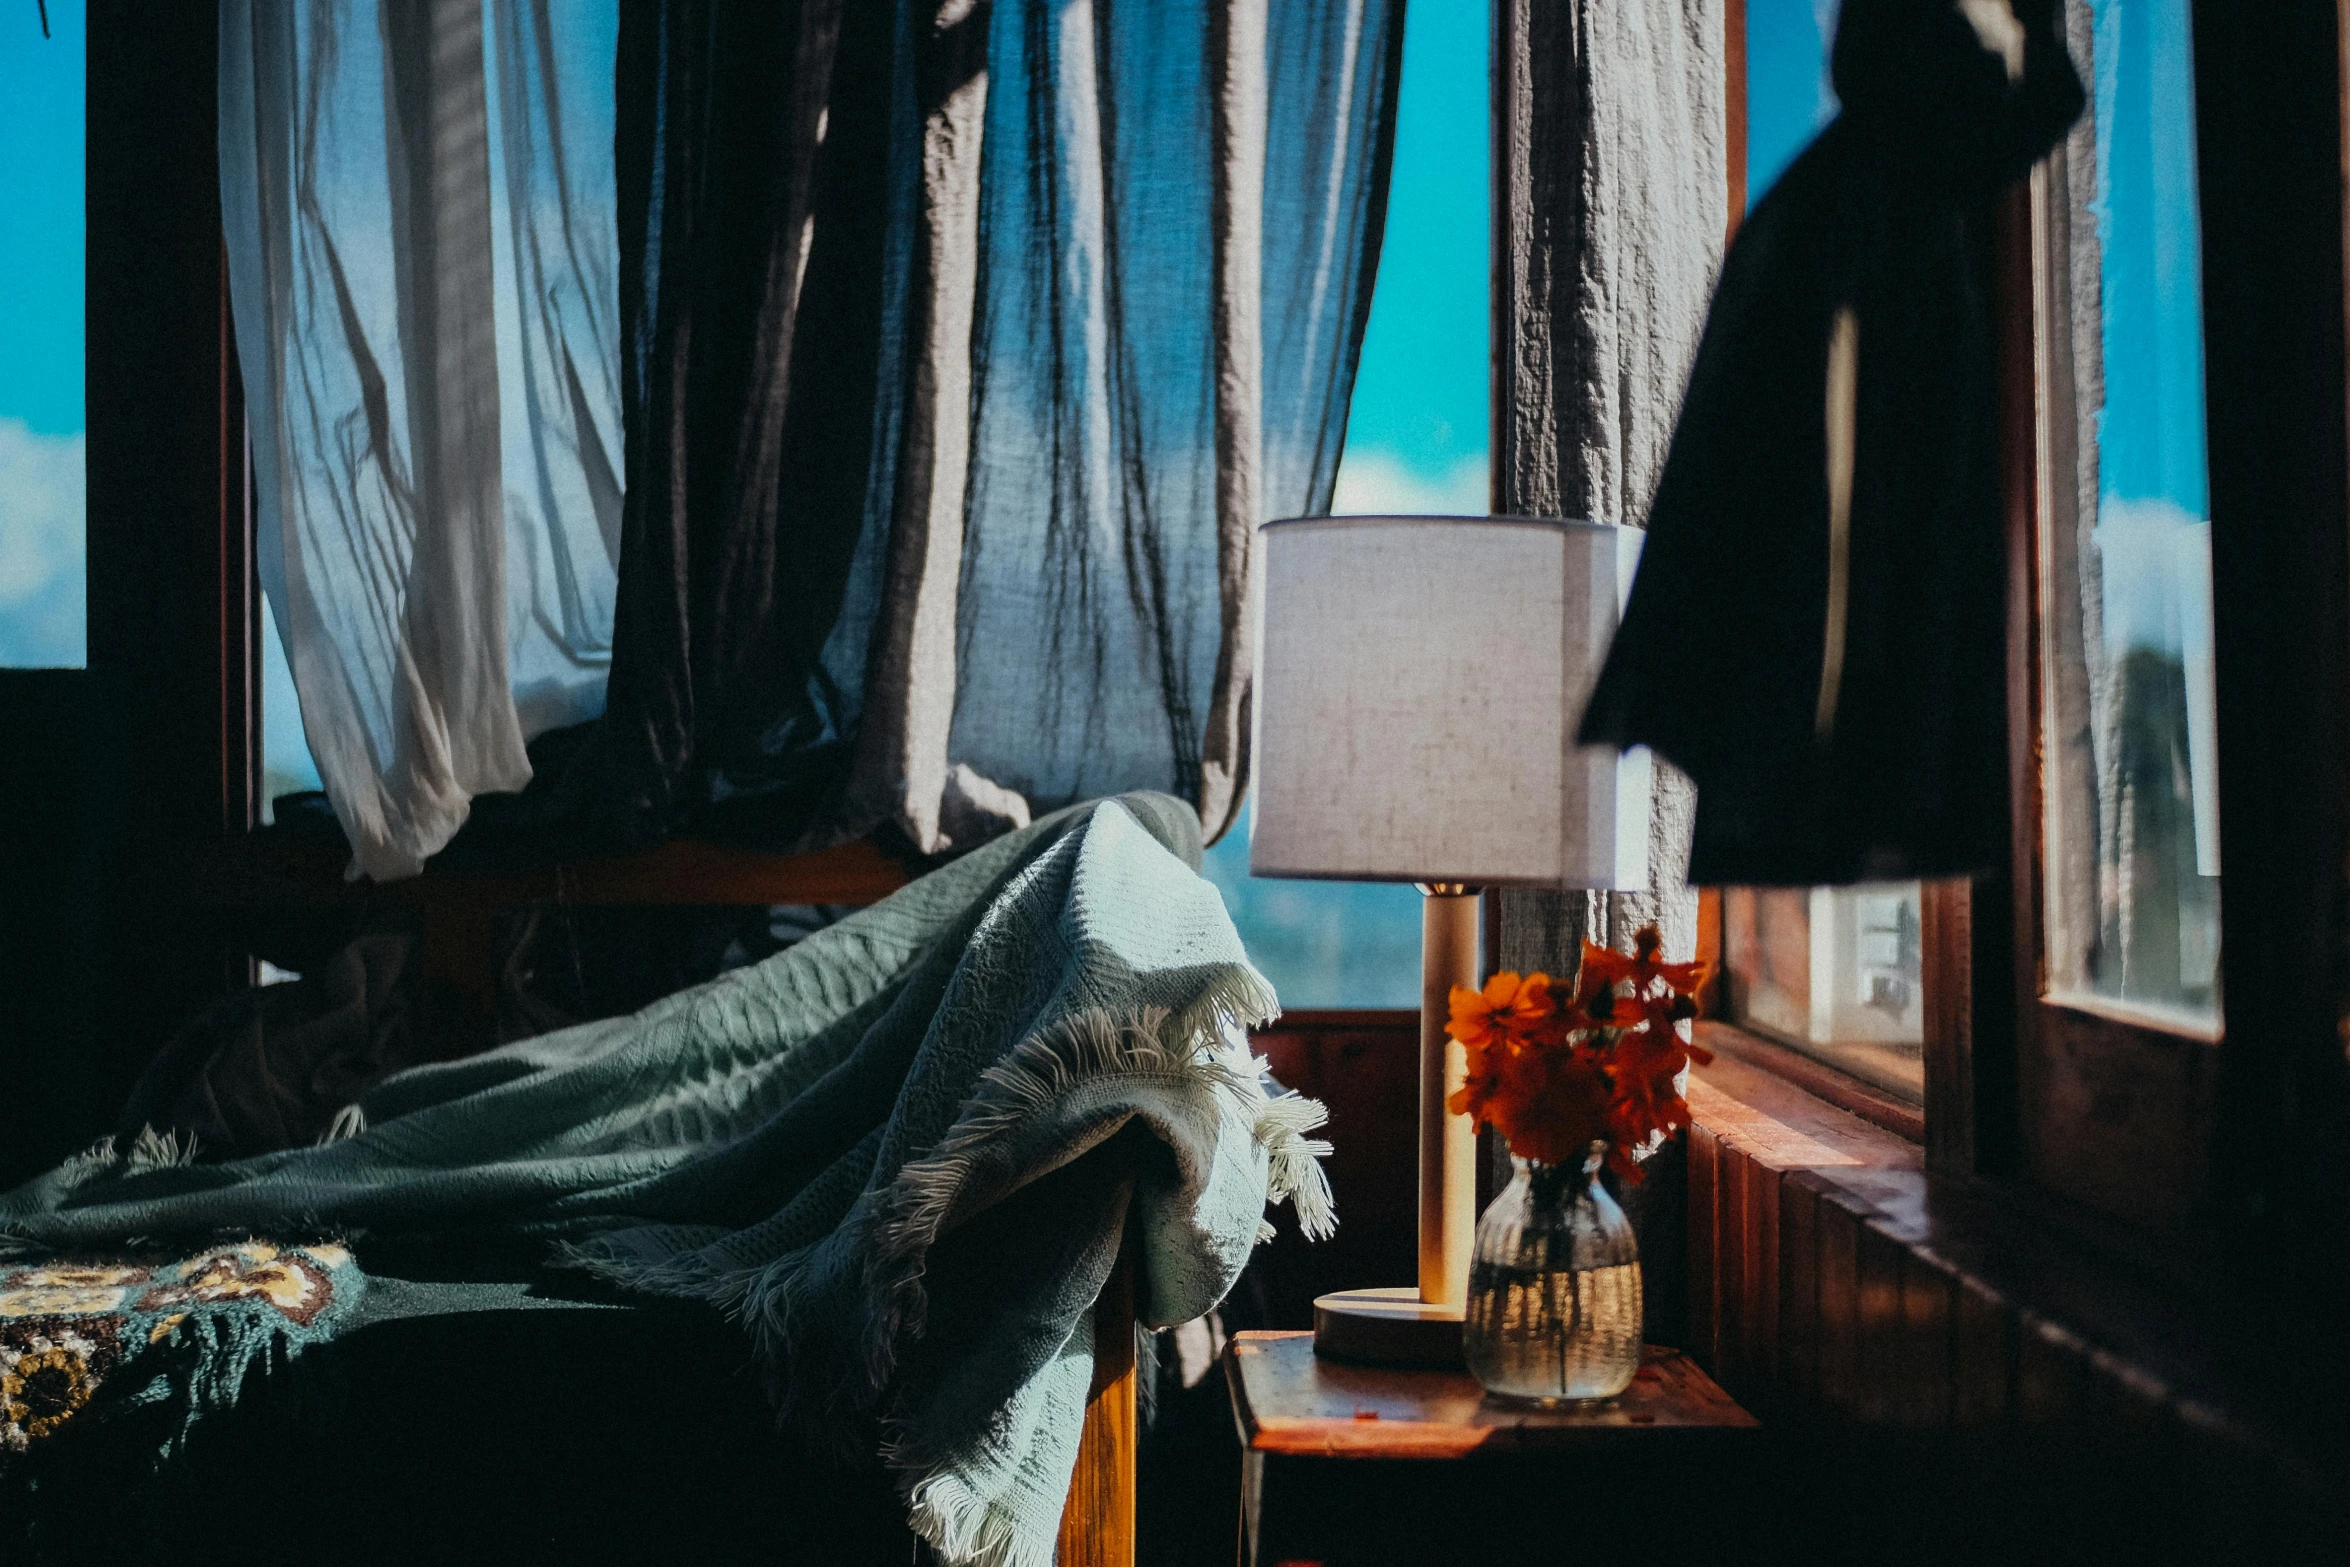 a bed sitting in a bedroom next to a window, a still life, trending on unsplash, magical realism, fully covered in drapes, lantern light besides, morning light showing injuries, light inside the hut